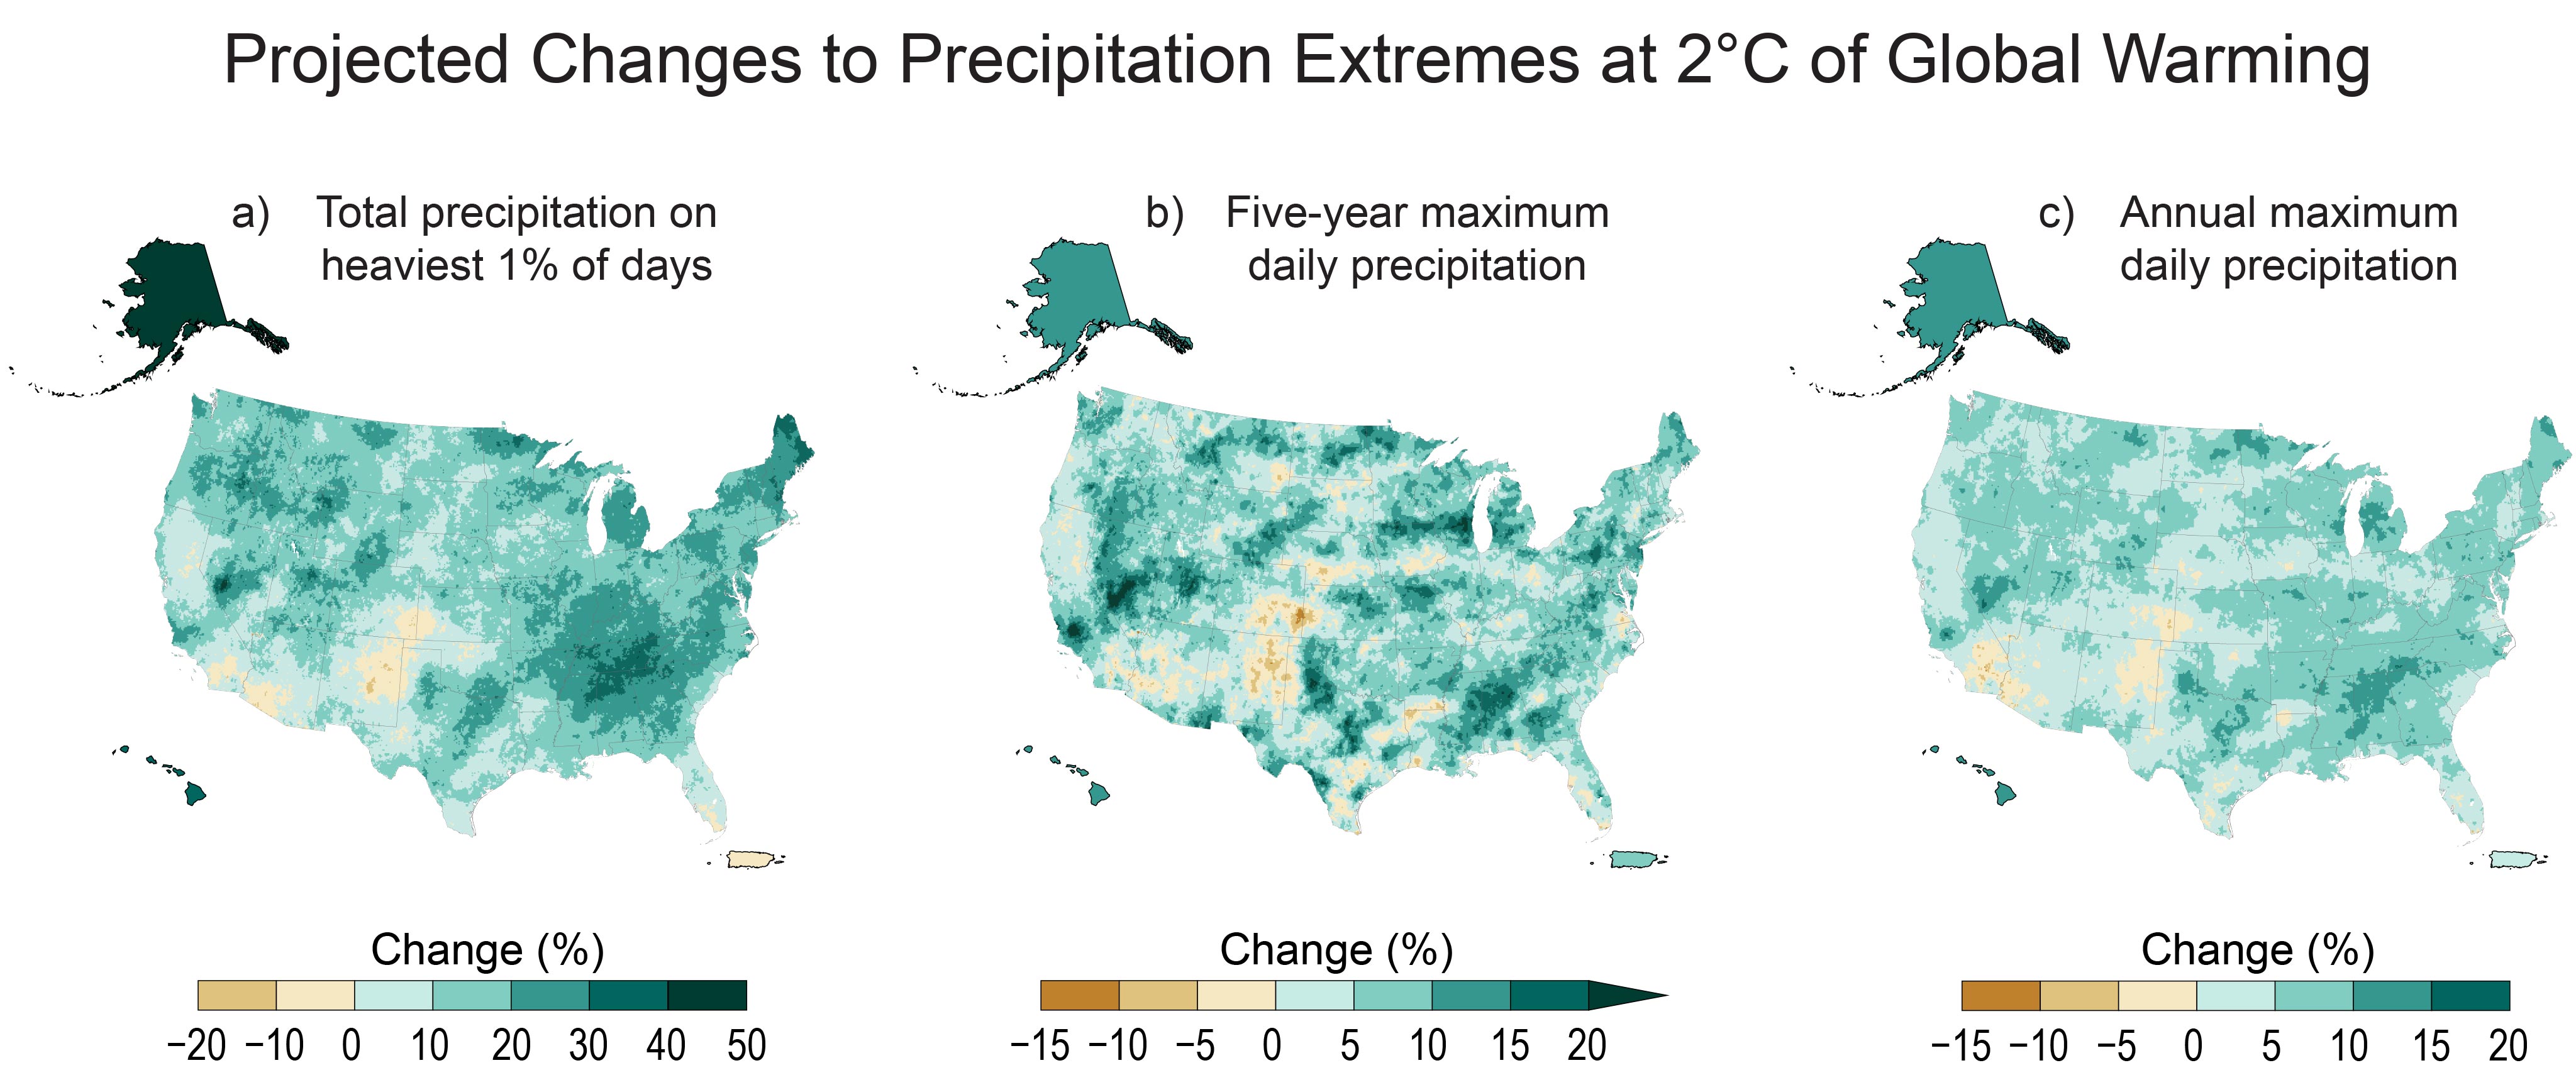 Projected Changes to Precipitation Extremes at 2°C of Global Warming